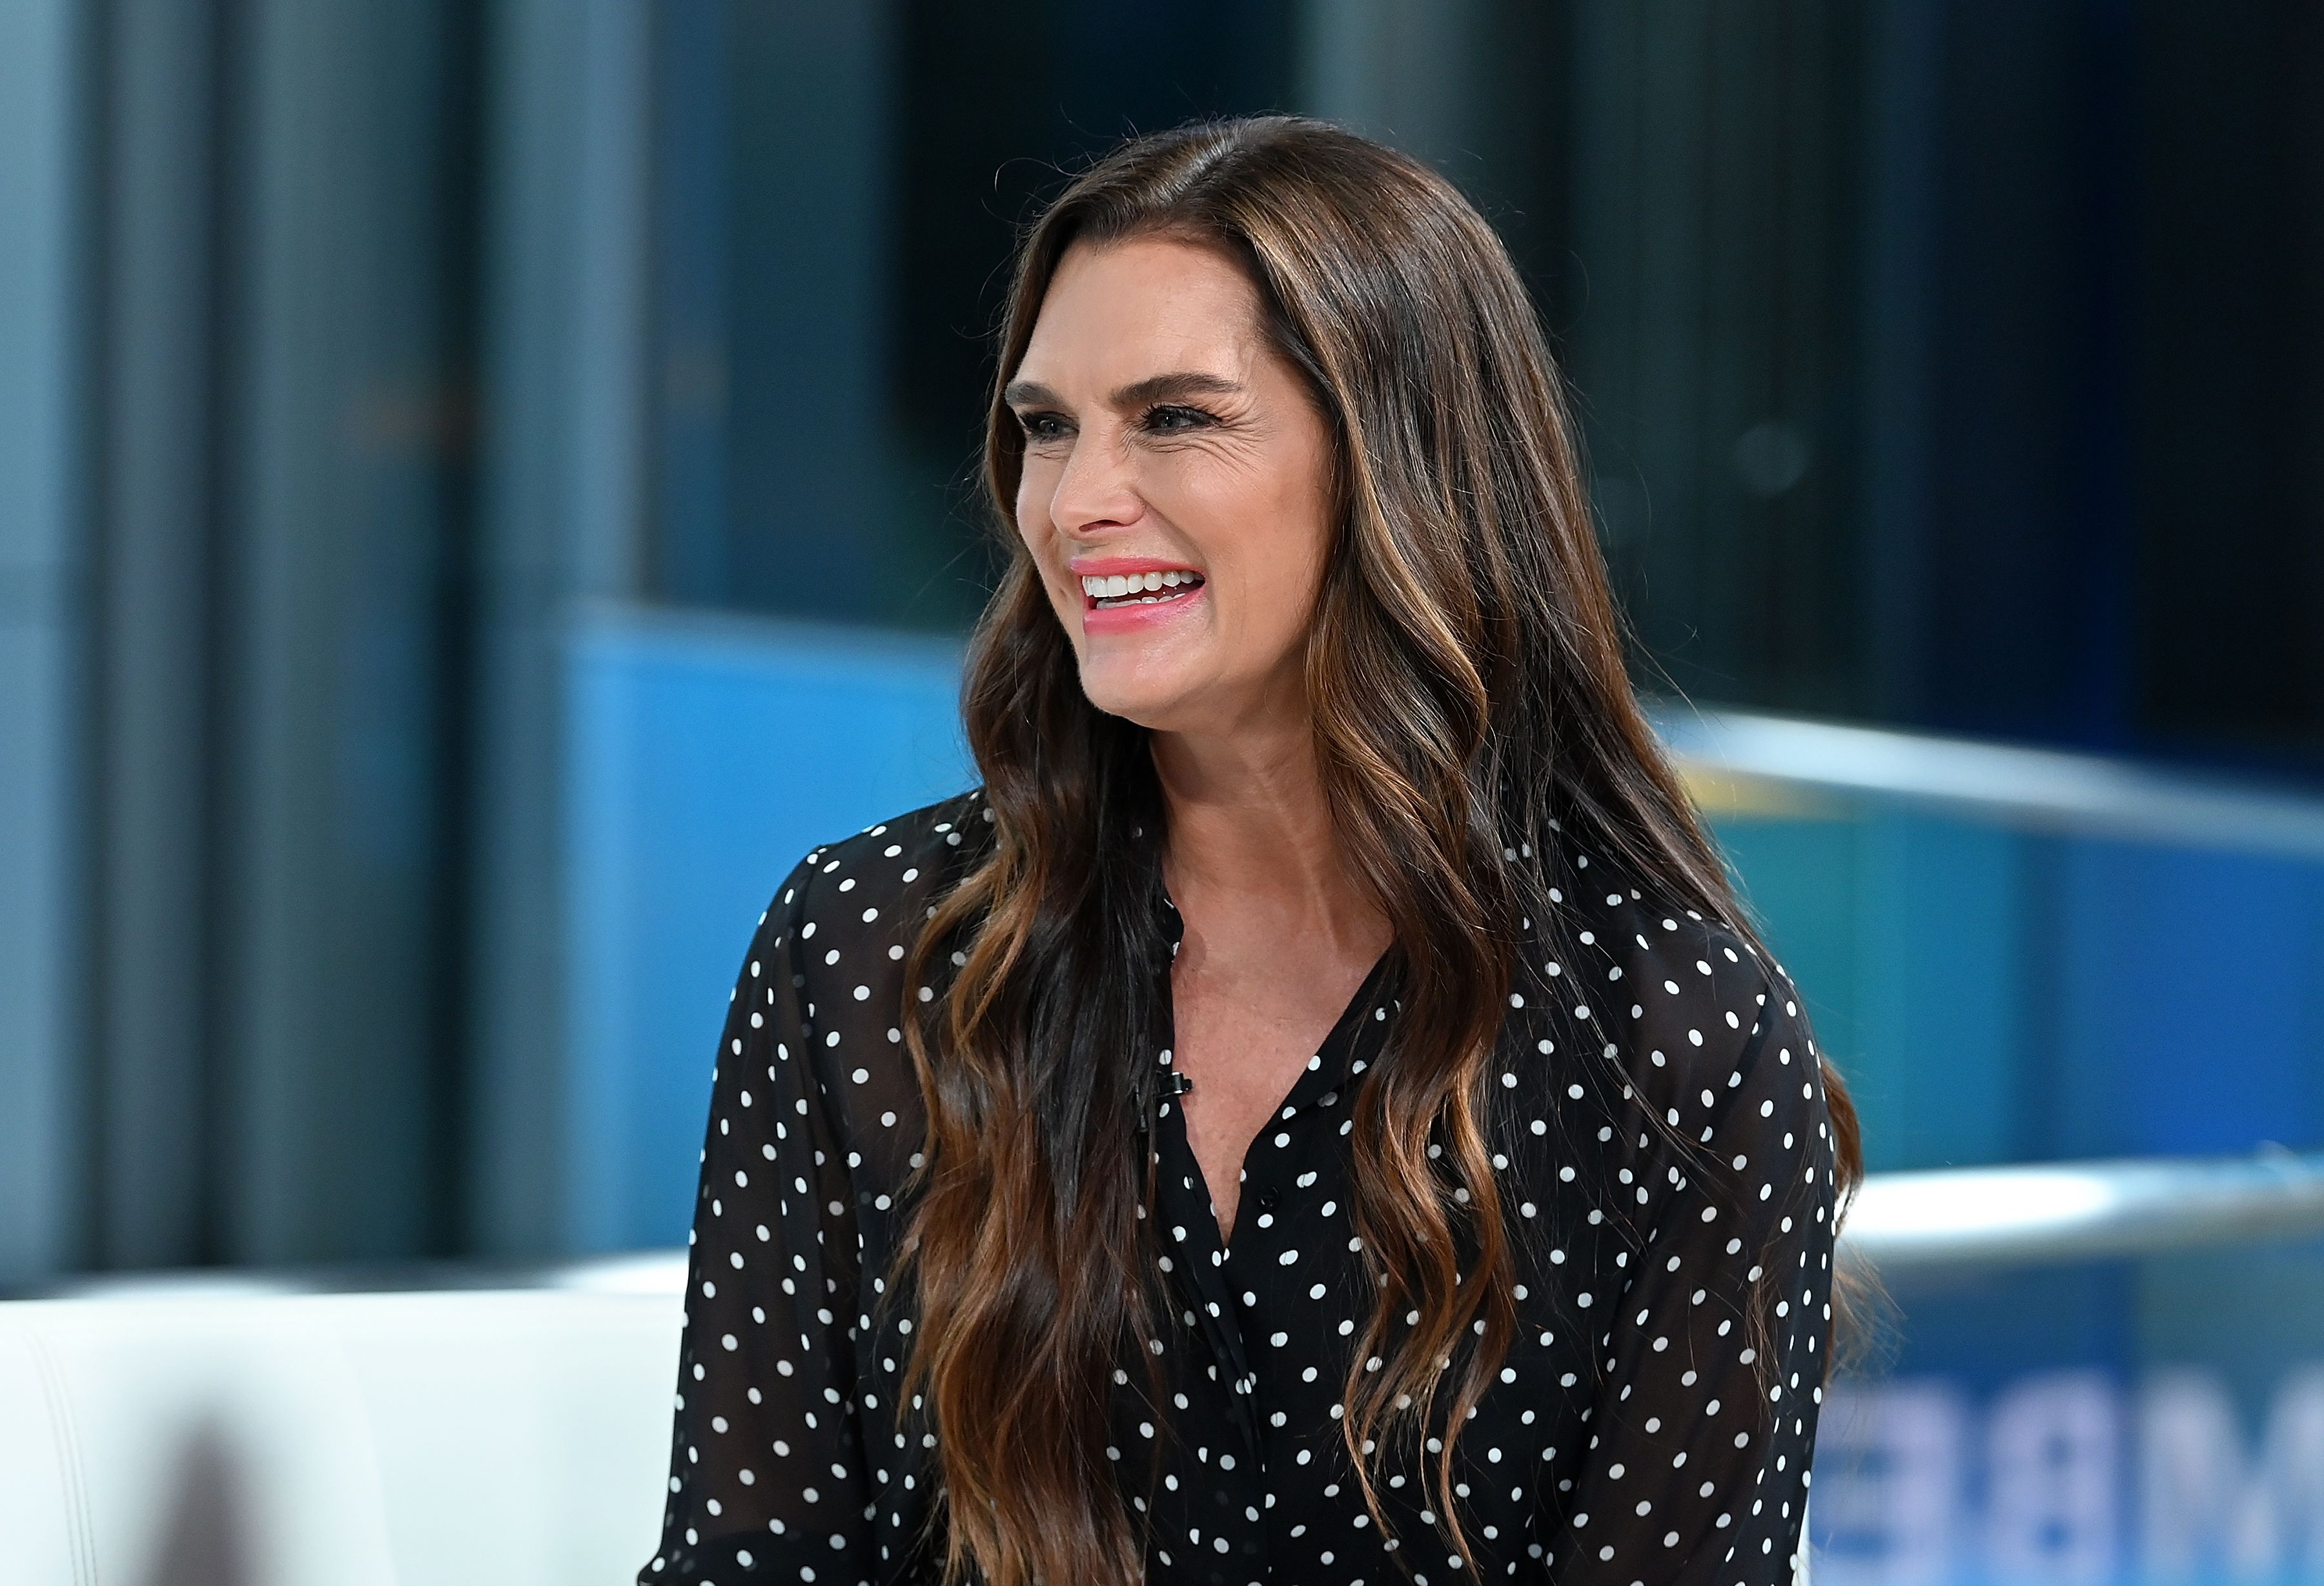 Brooke Shields visits "FOX & Friends" at Fox News Channel Studios | Source: Getty Images